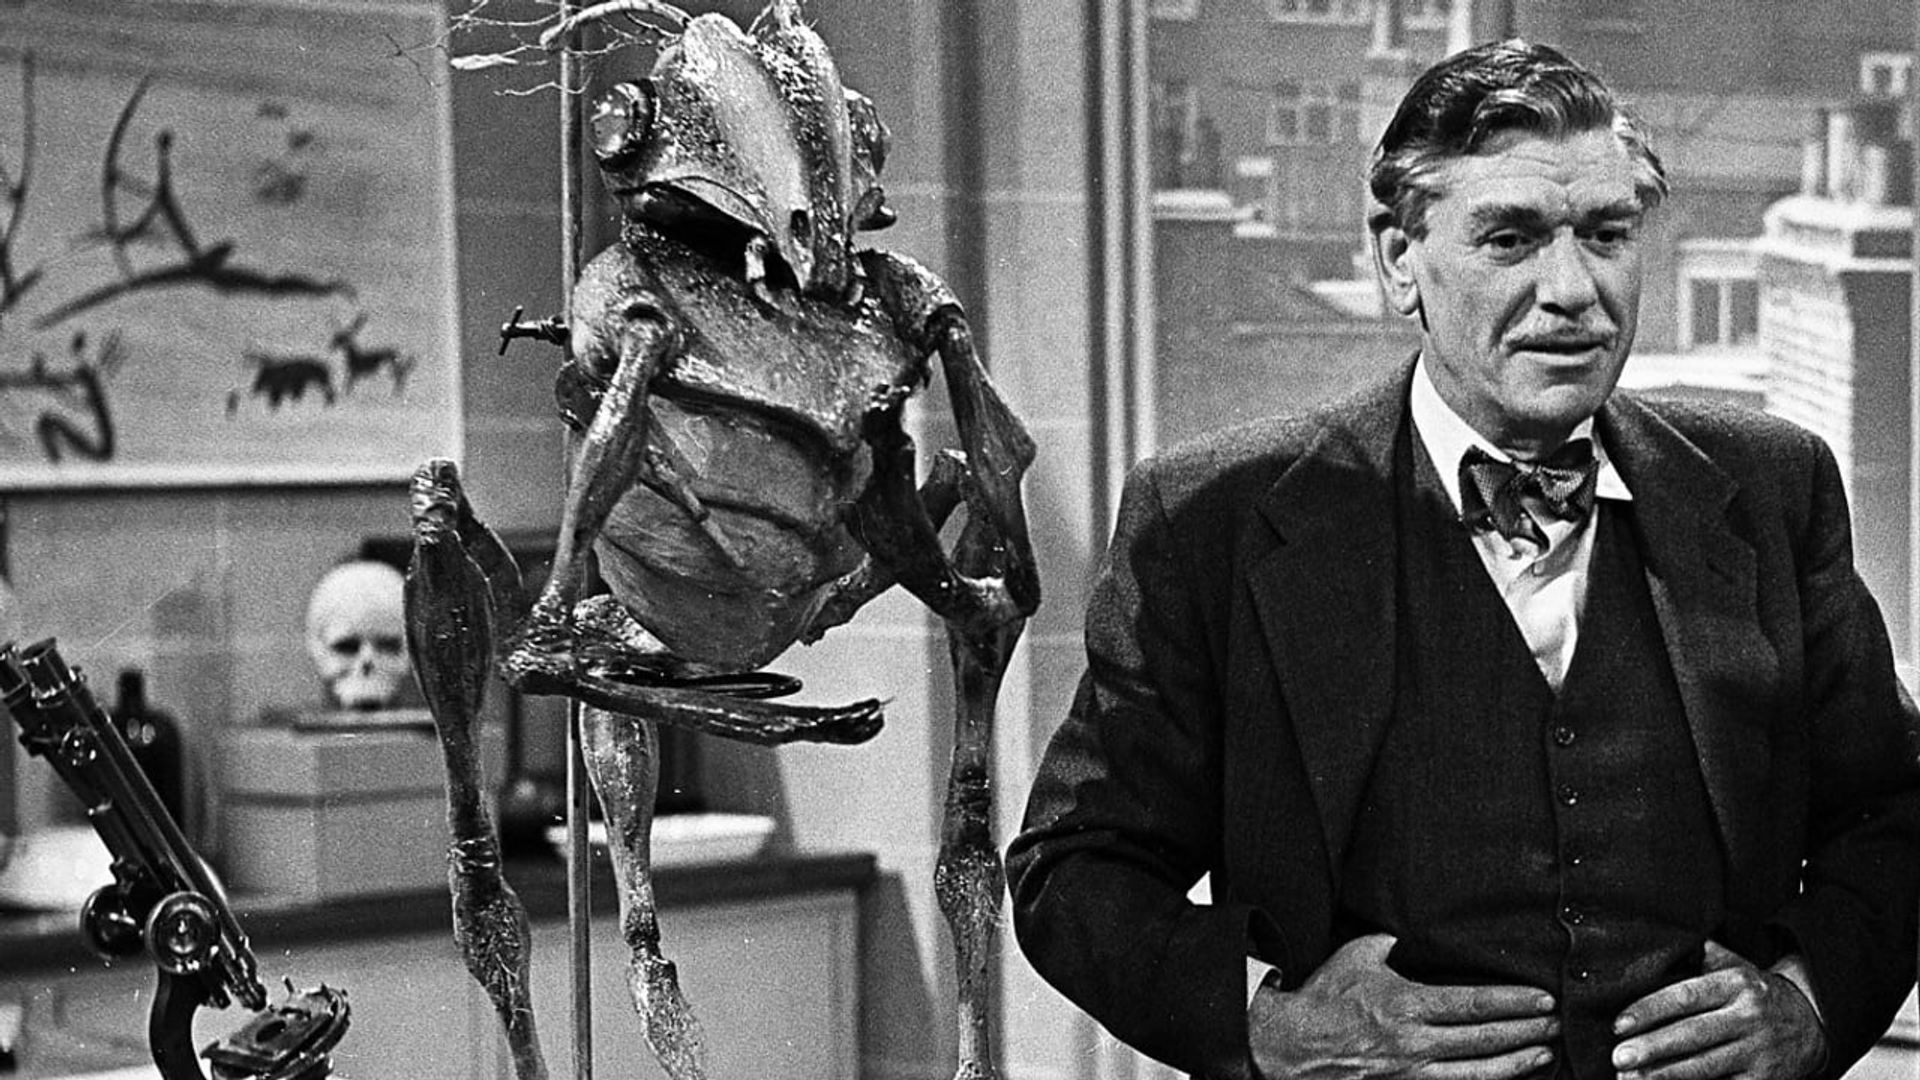 Quatermass and the Pit background